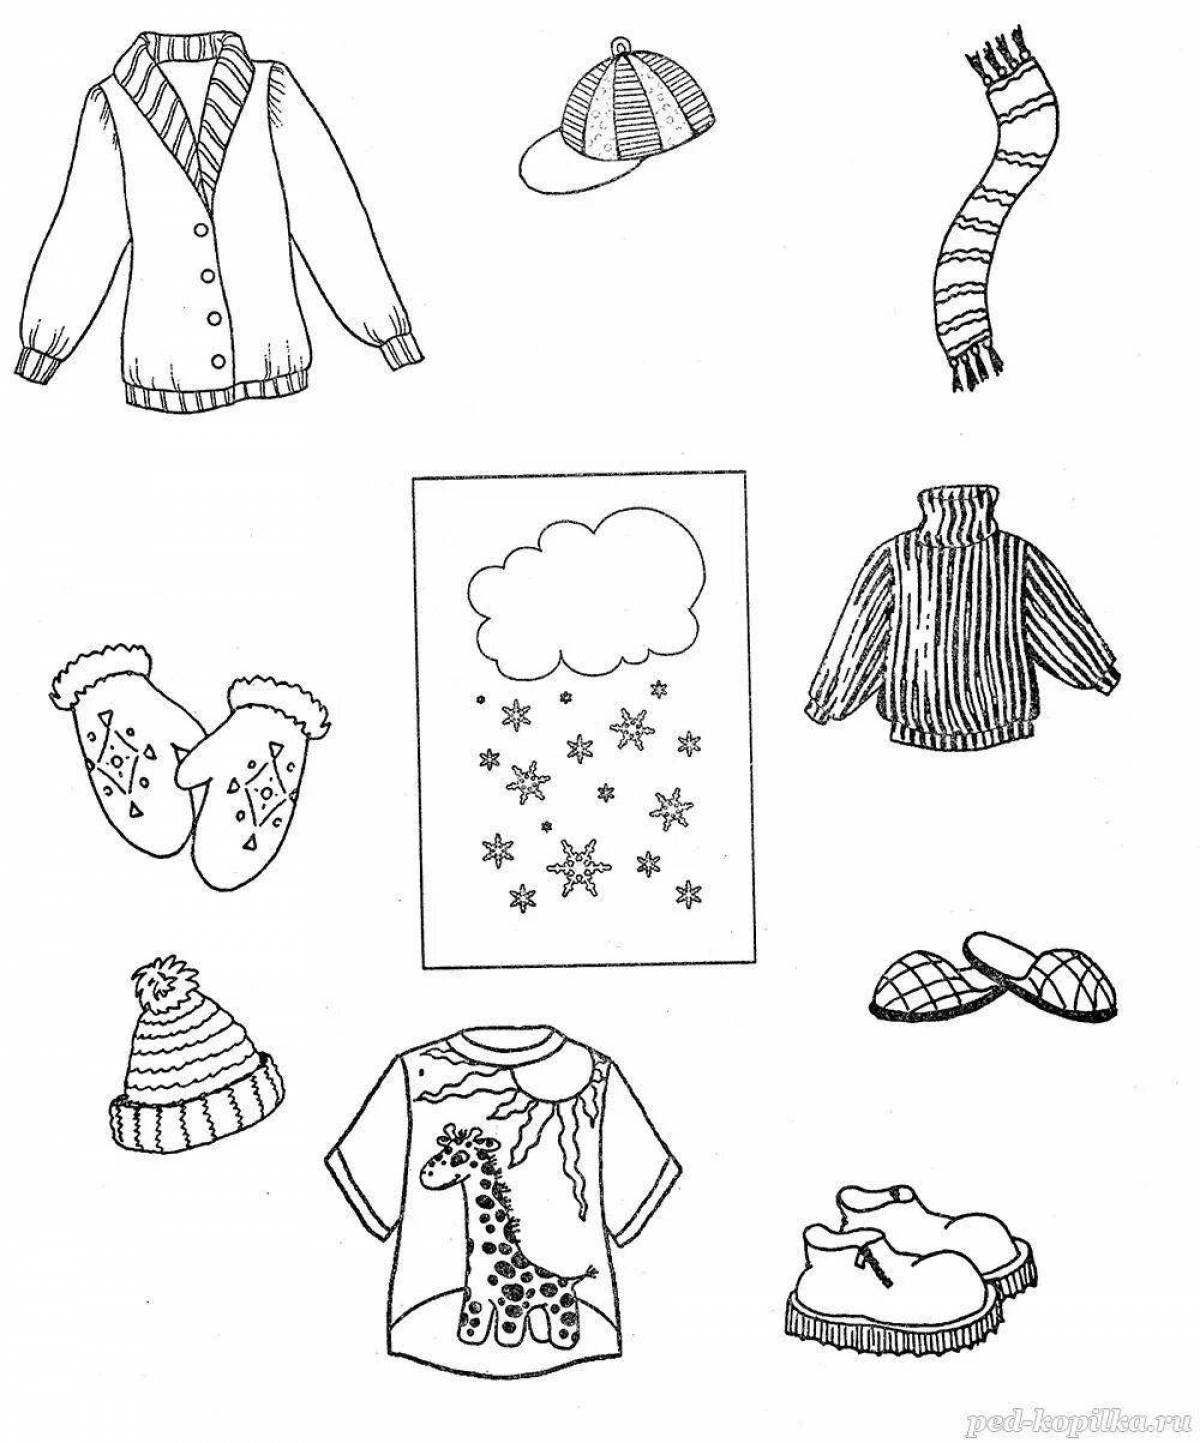 Impressive winter clothes coloring page for 6-7 year olds